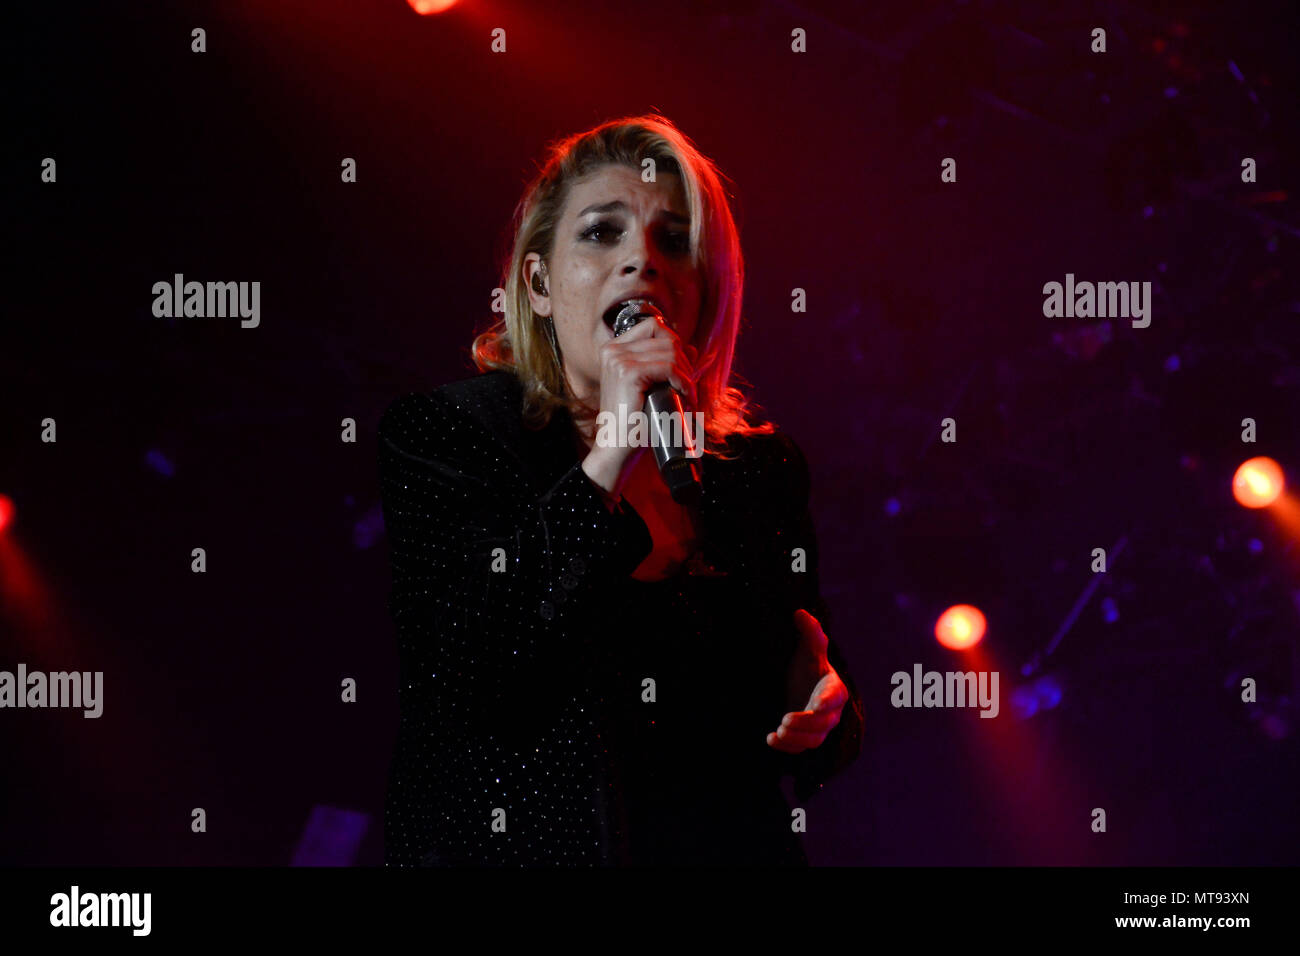 Naples, Italy. 28 May, 2018. The italian singer Emmanuela Marrone, also known as Emma or Emma Marrone performing live for the last date of her tour 'Essere Qui Tour 2018' at the Teatro Palapartenope in Naples,Italy. Stock Photo